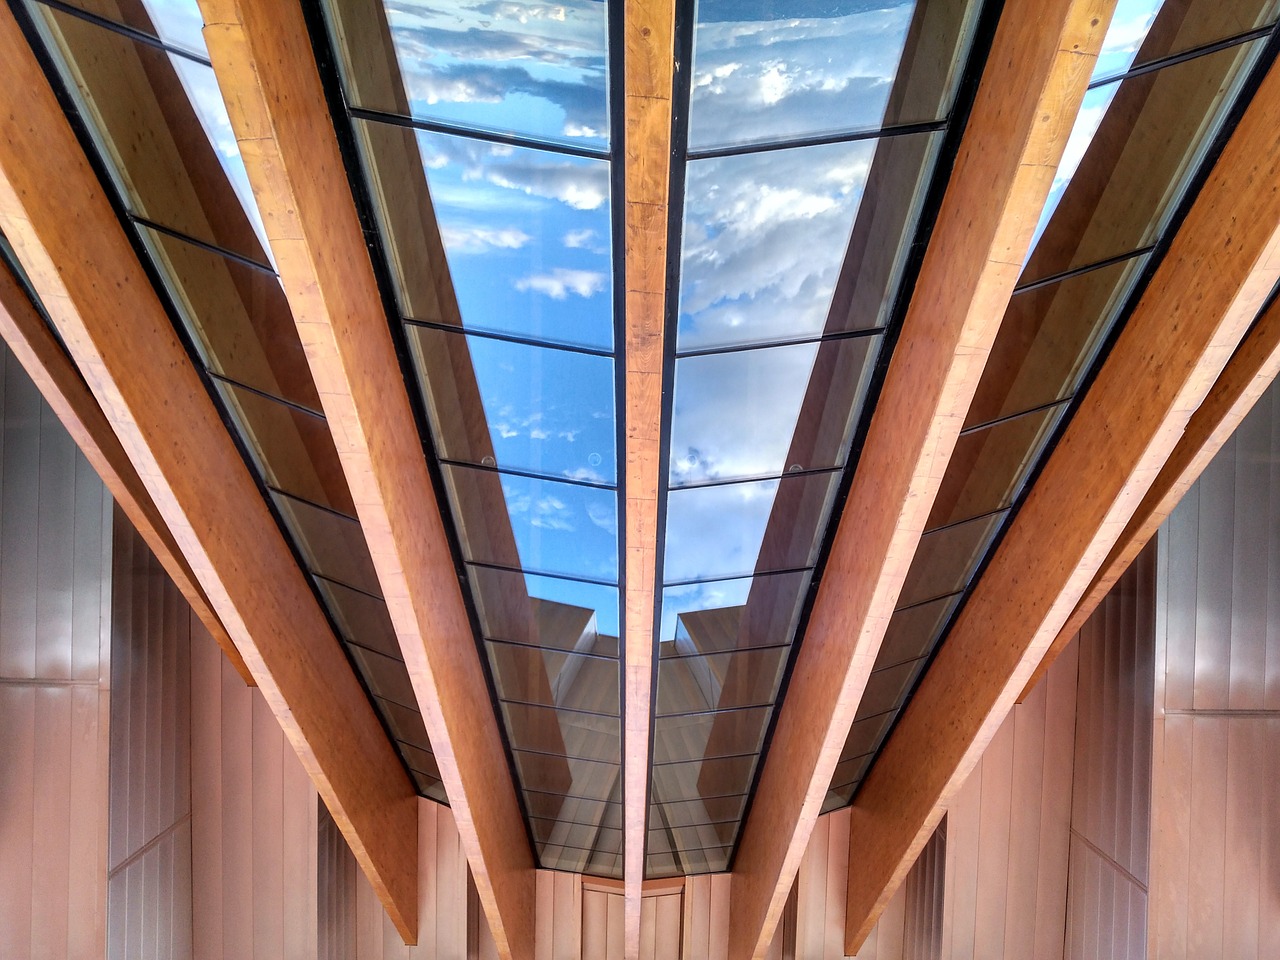 A sky light made of ASI Architectural acoustic wooden beams and glass offers a view of a cloudy sky